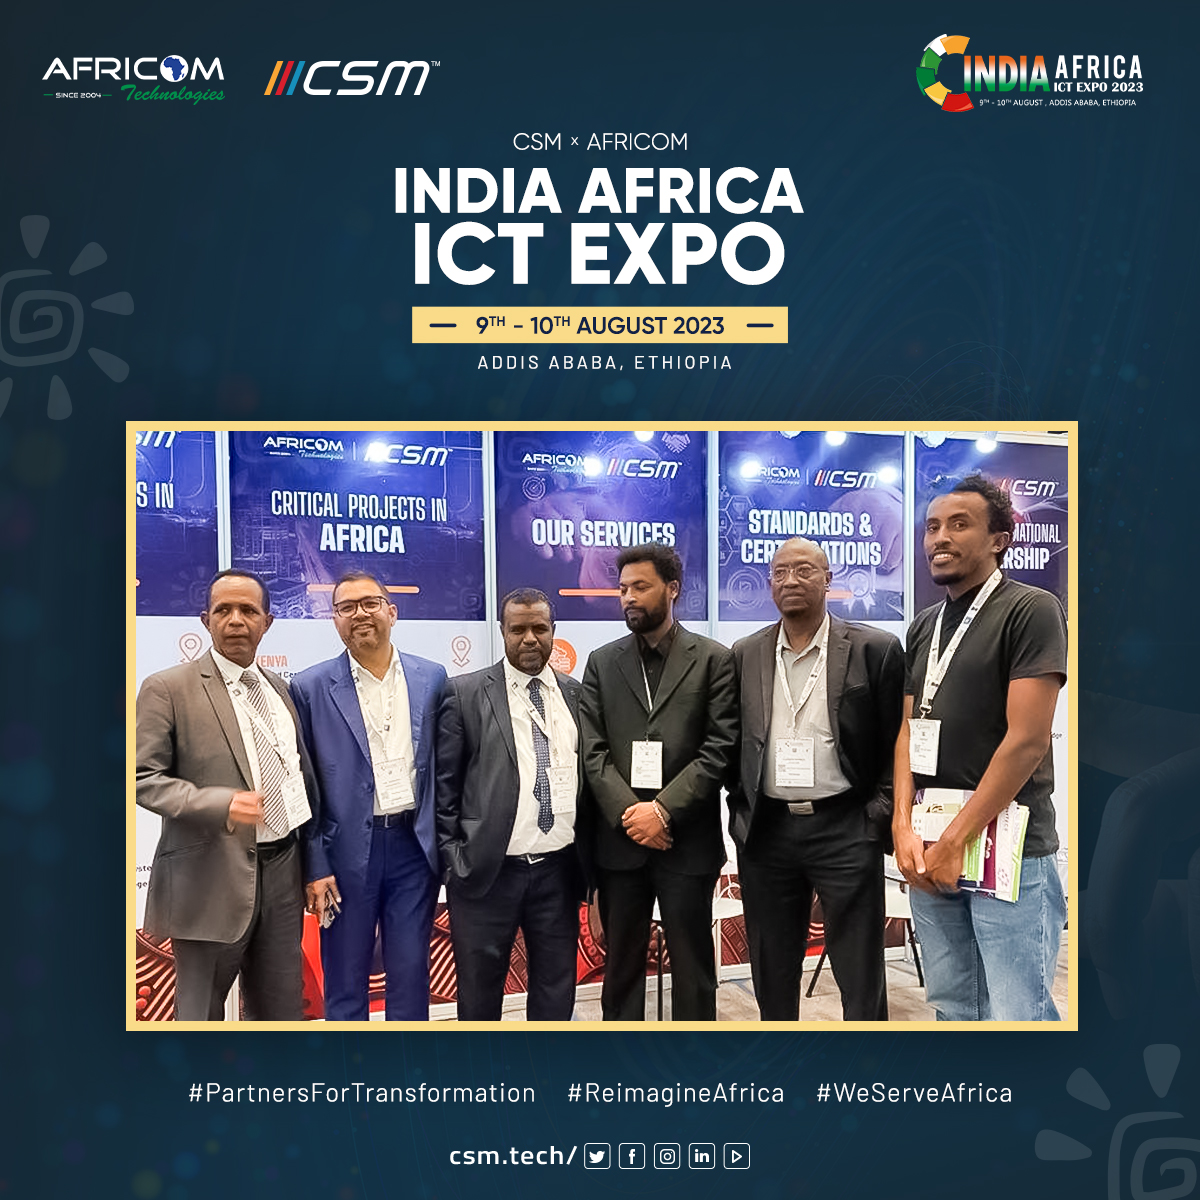 It was a bright first day for CSM & AFRICOM at India Africa ICT Expo, where we were able to hold a lot of discussions on leveraging tech for good governance.

#ReimagineAfrica #WeServeAfrica